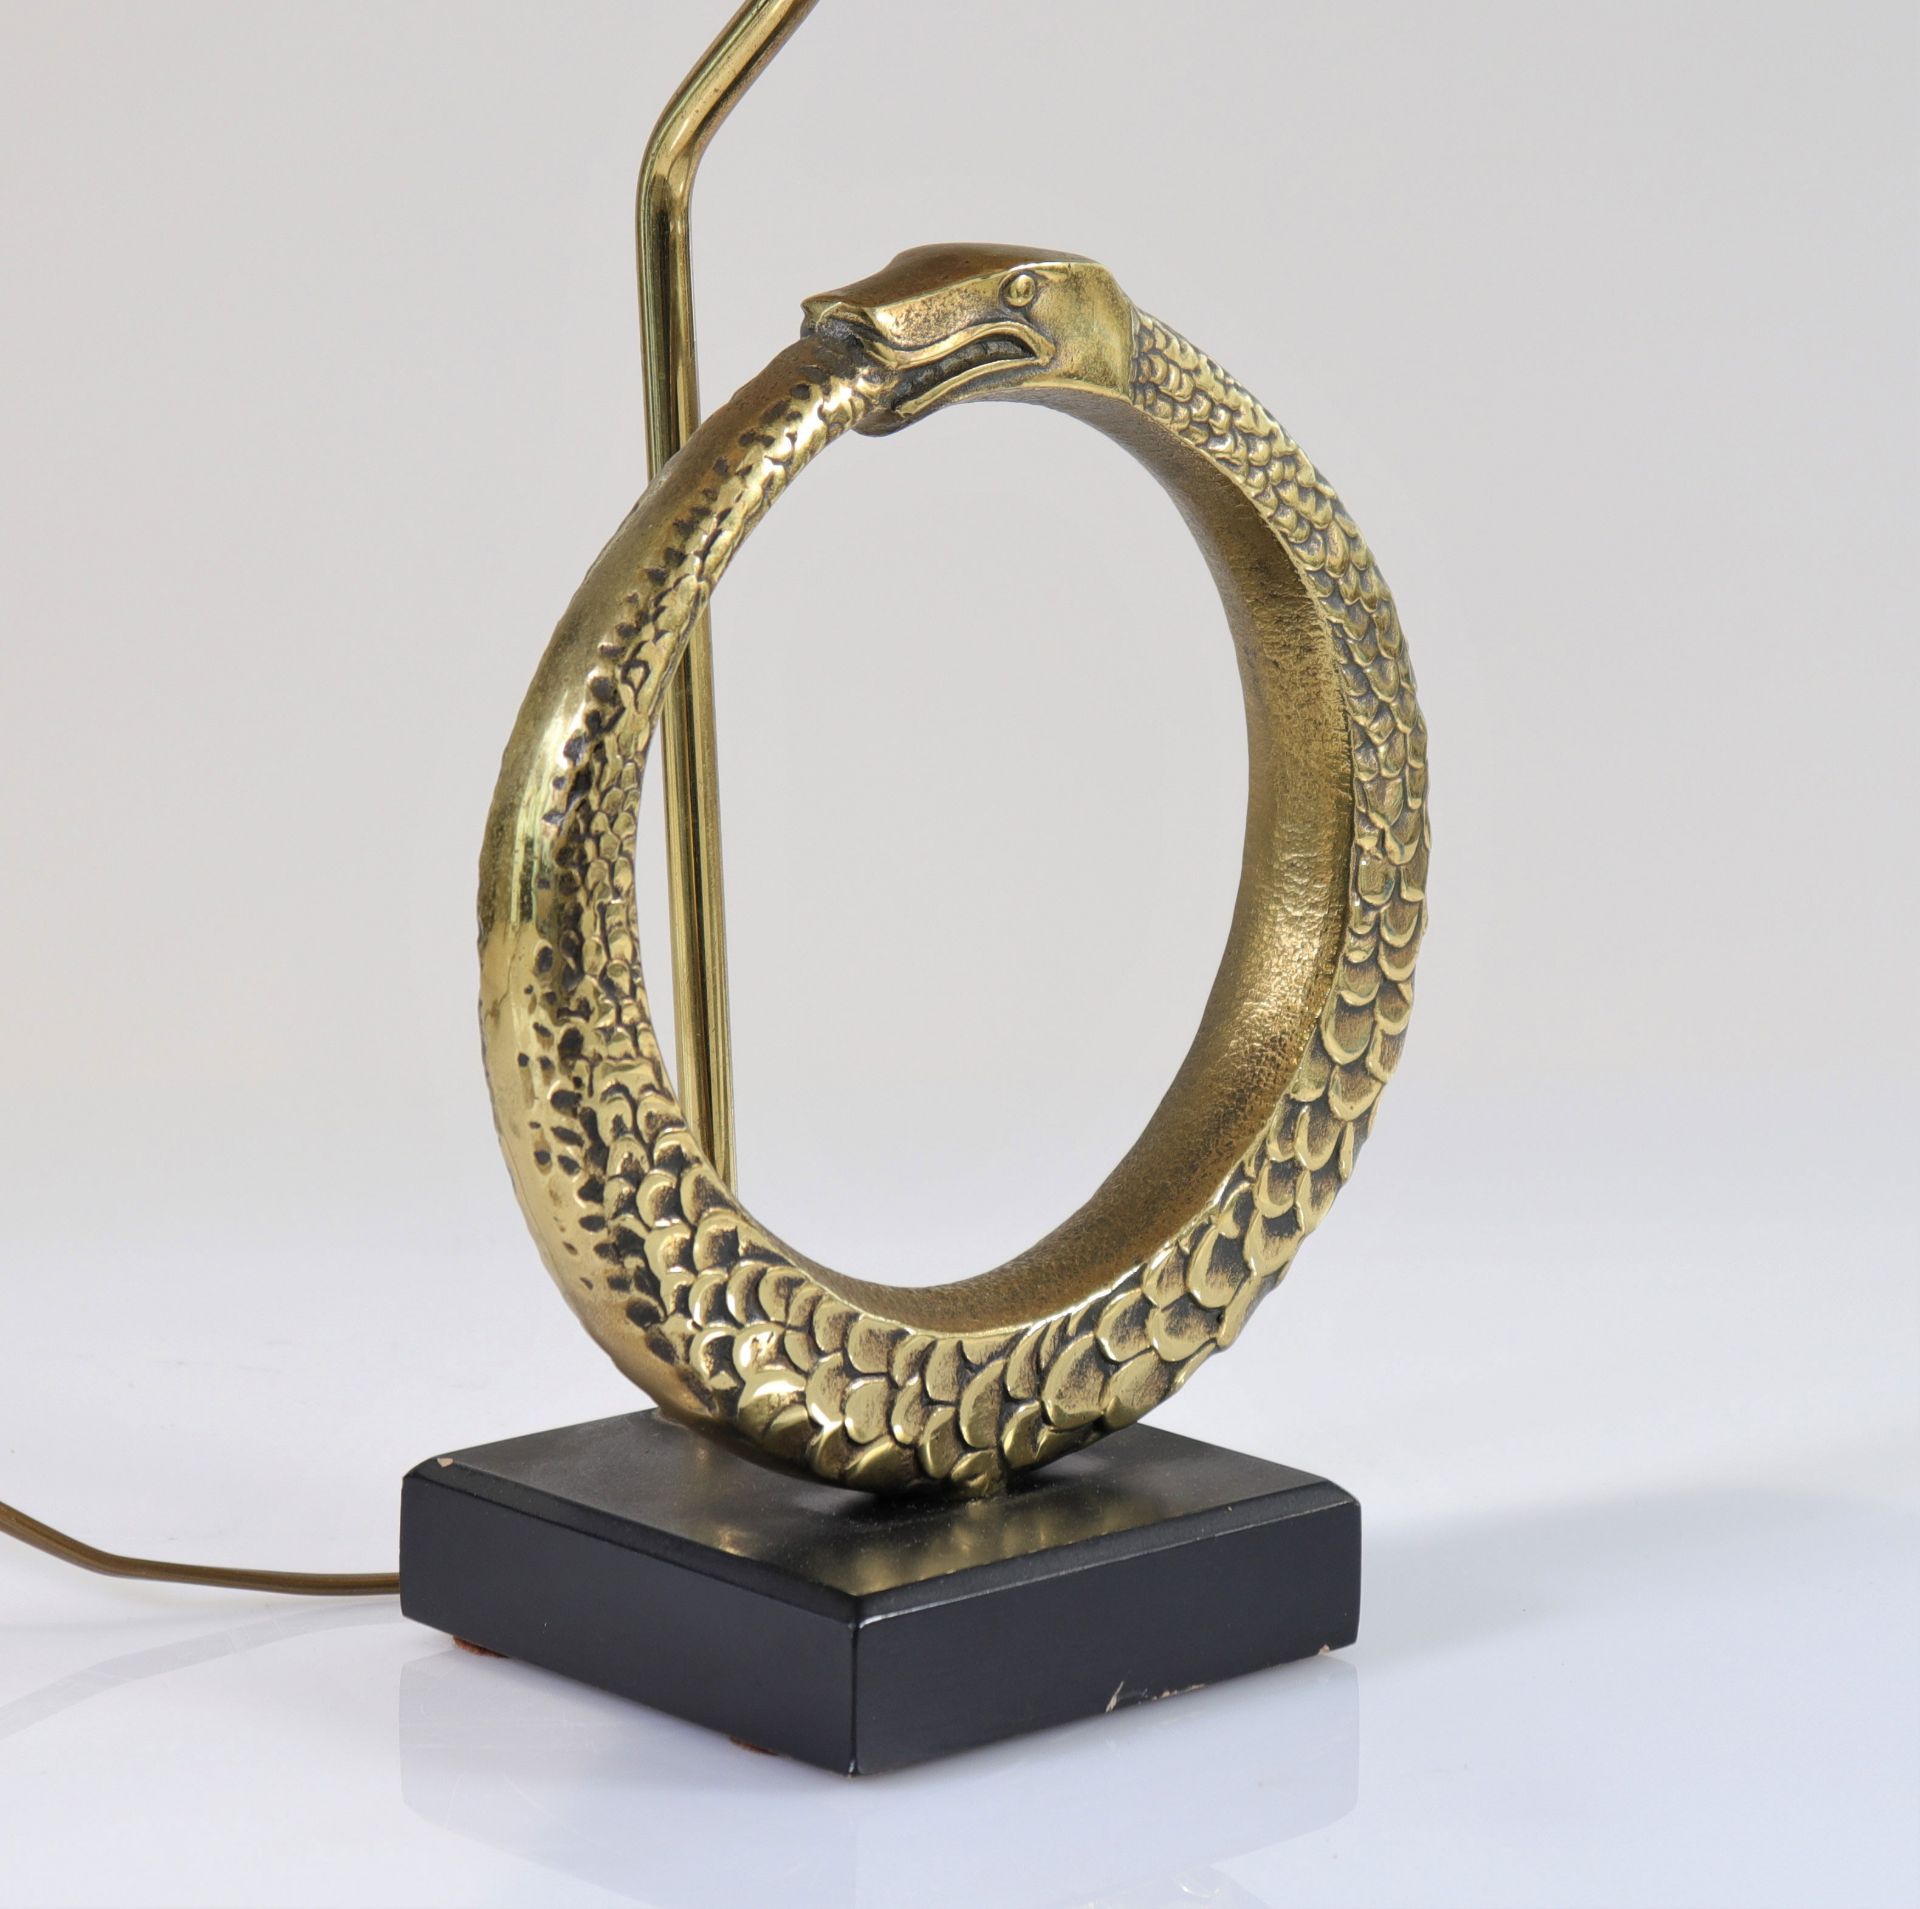 Vintage lamp decorated with a snake biting its tail in bronze - Image 3 of 3